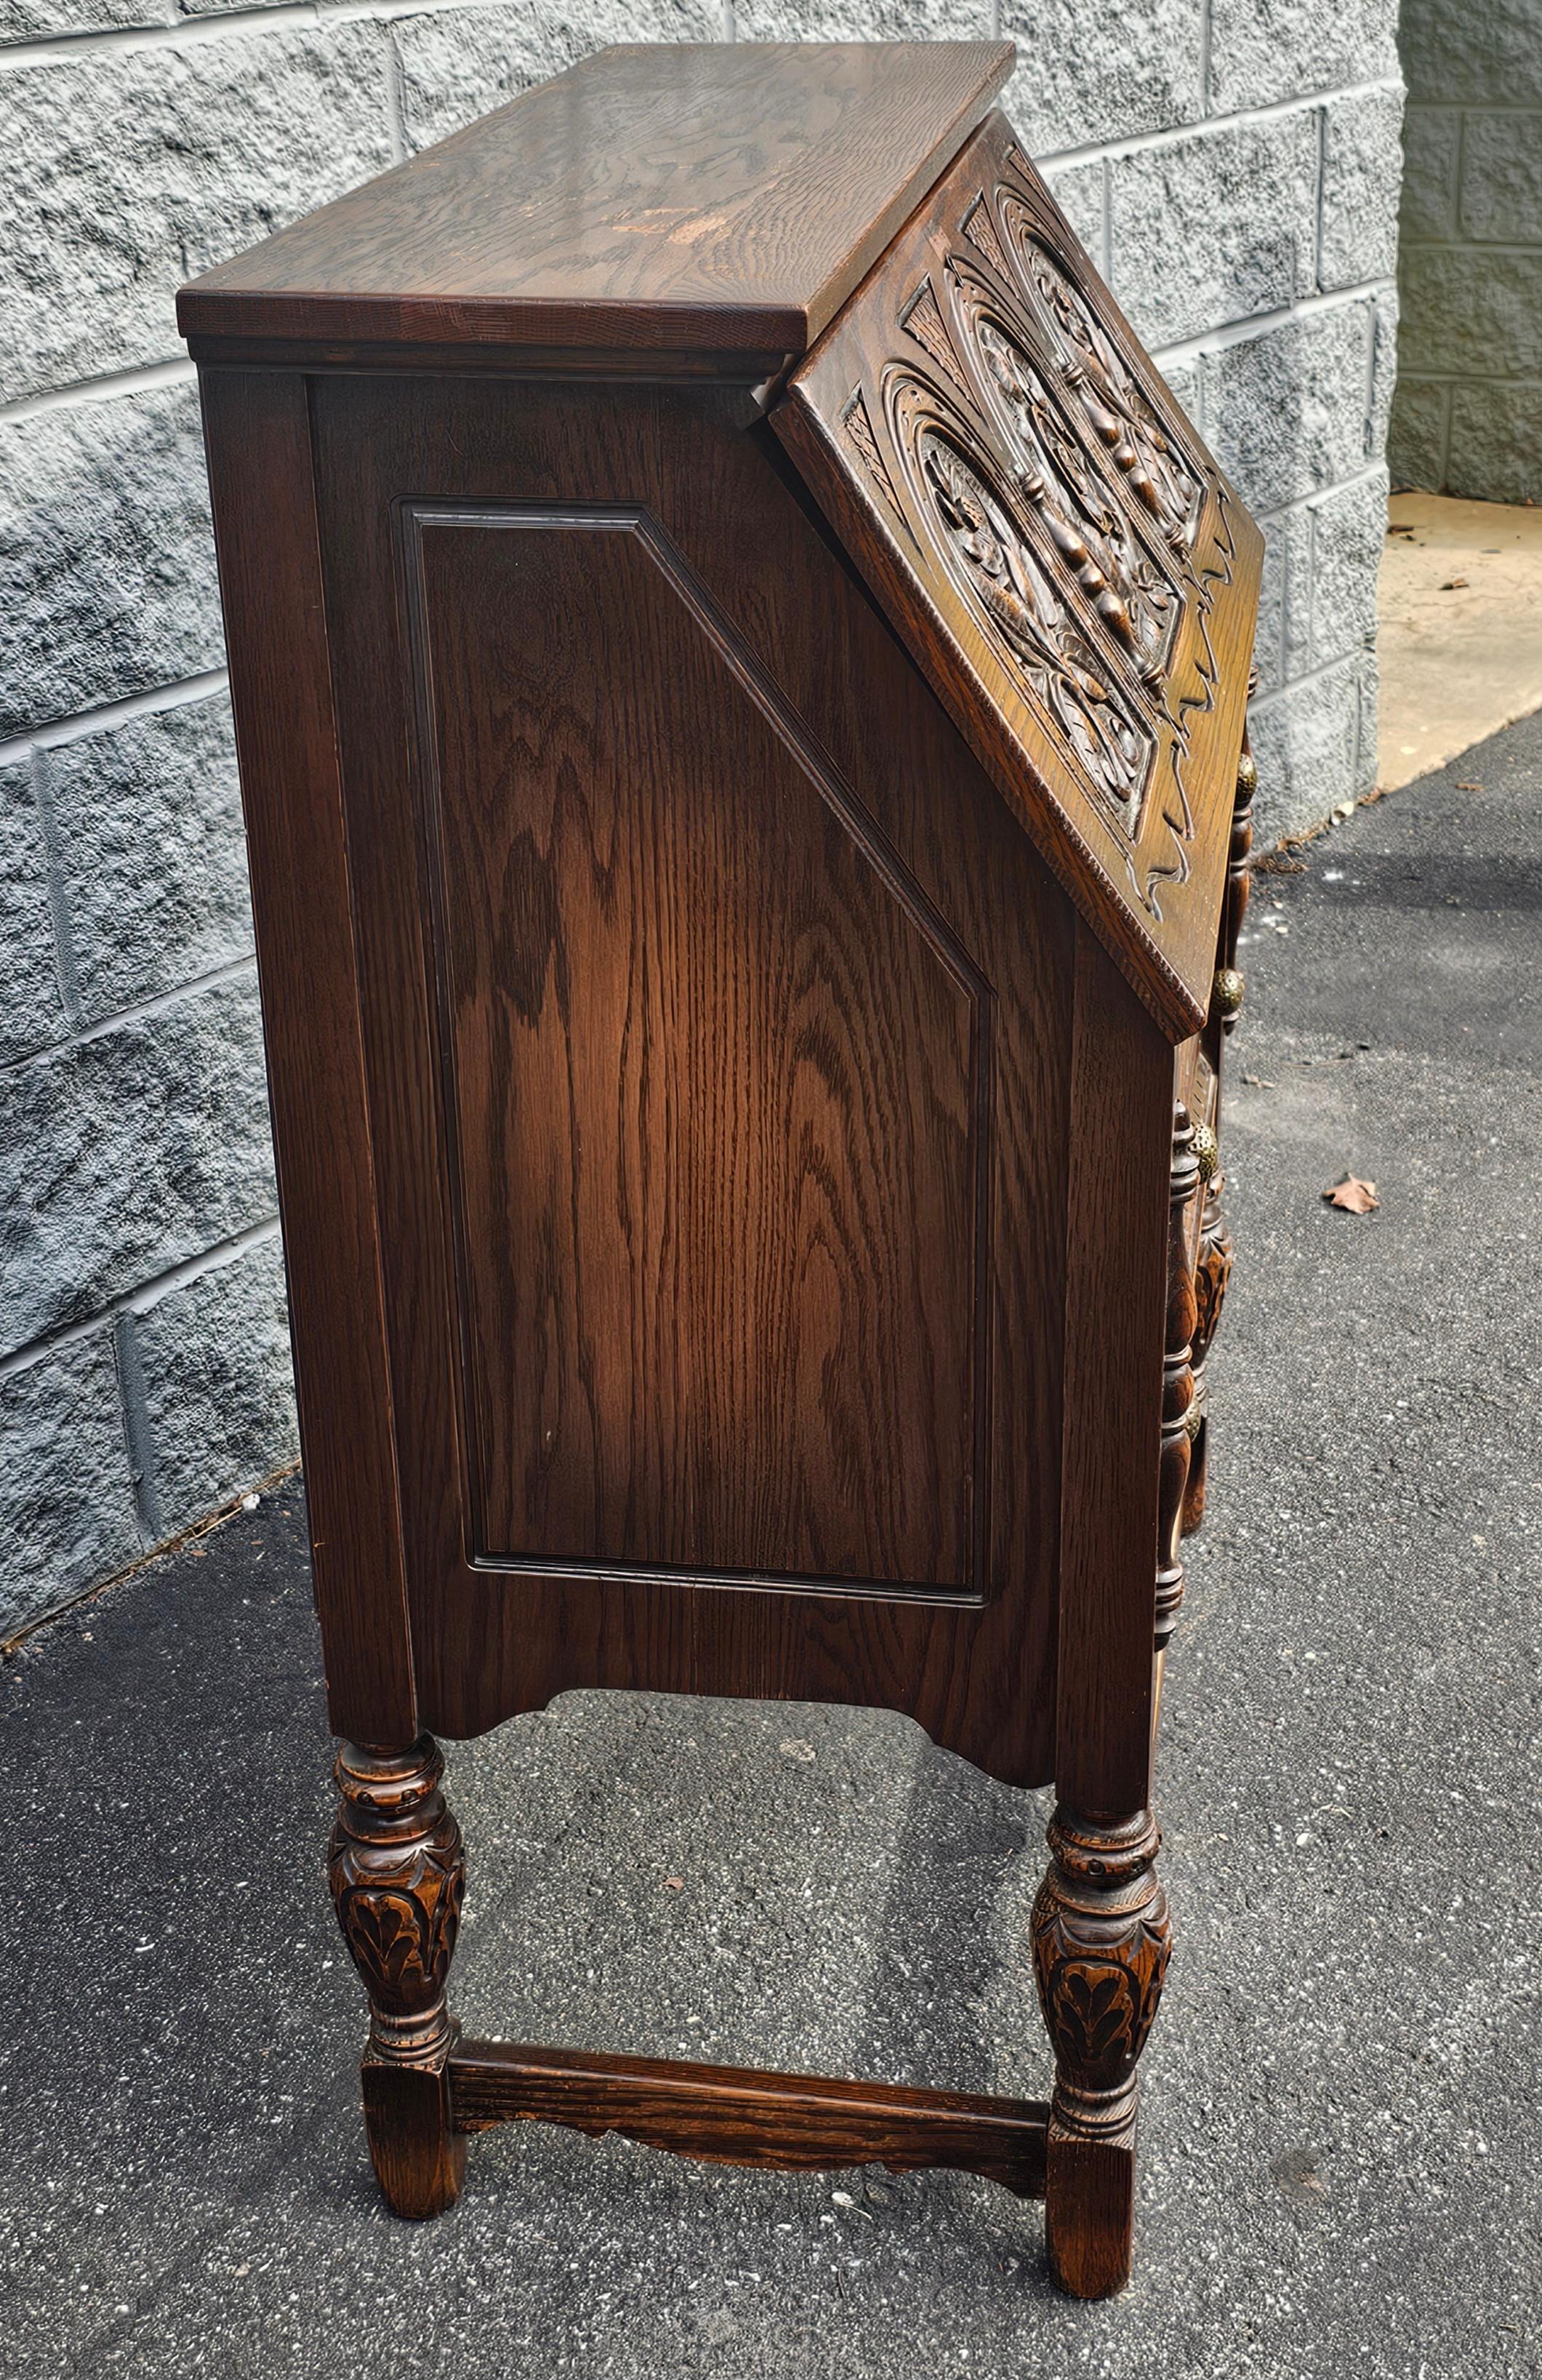 1930s Rockford Furniture Jacobean Style Handcrafted Secretary Desk In Good Condition For Sale In Germantown, MD